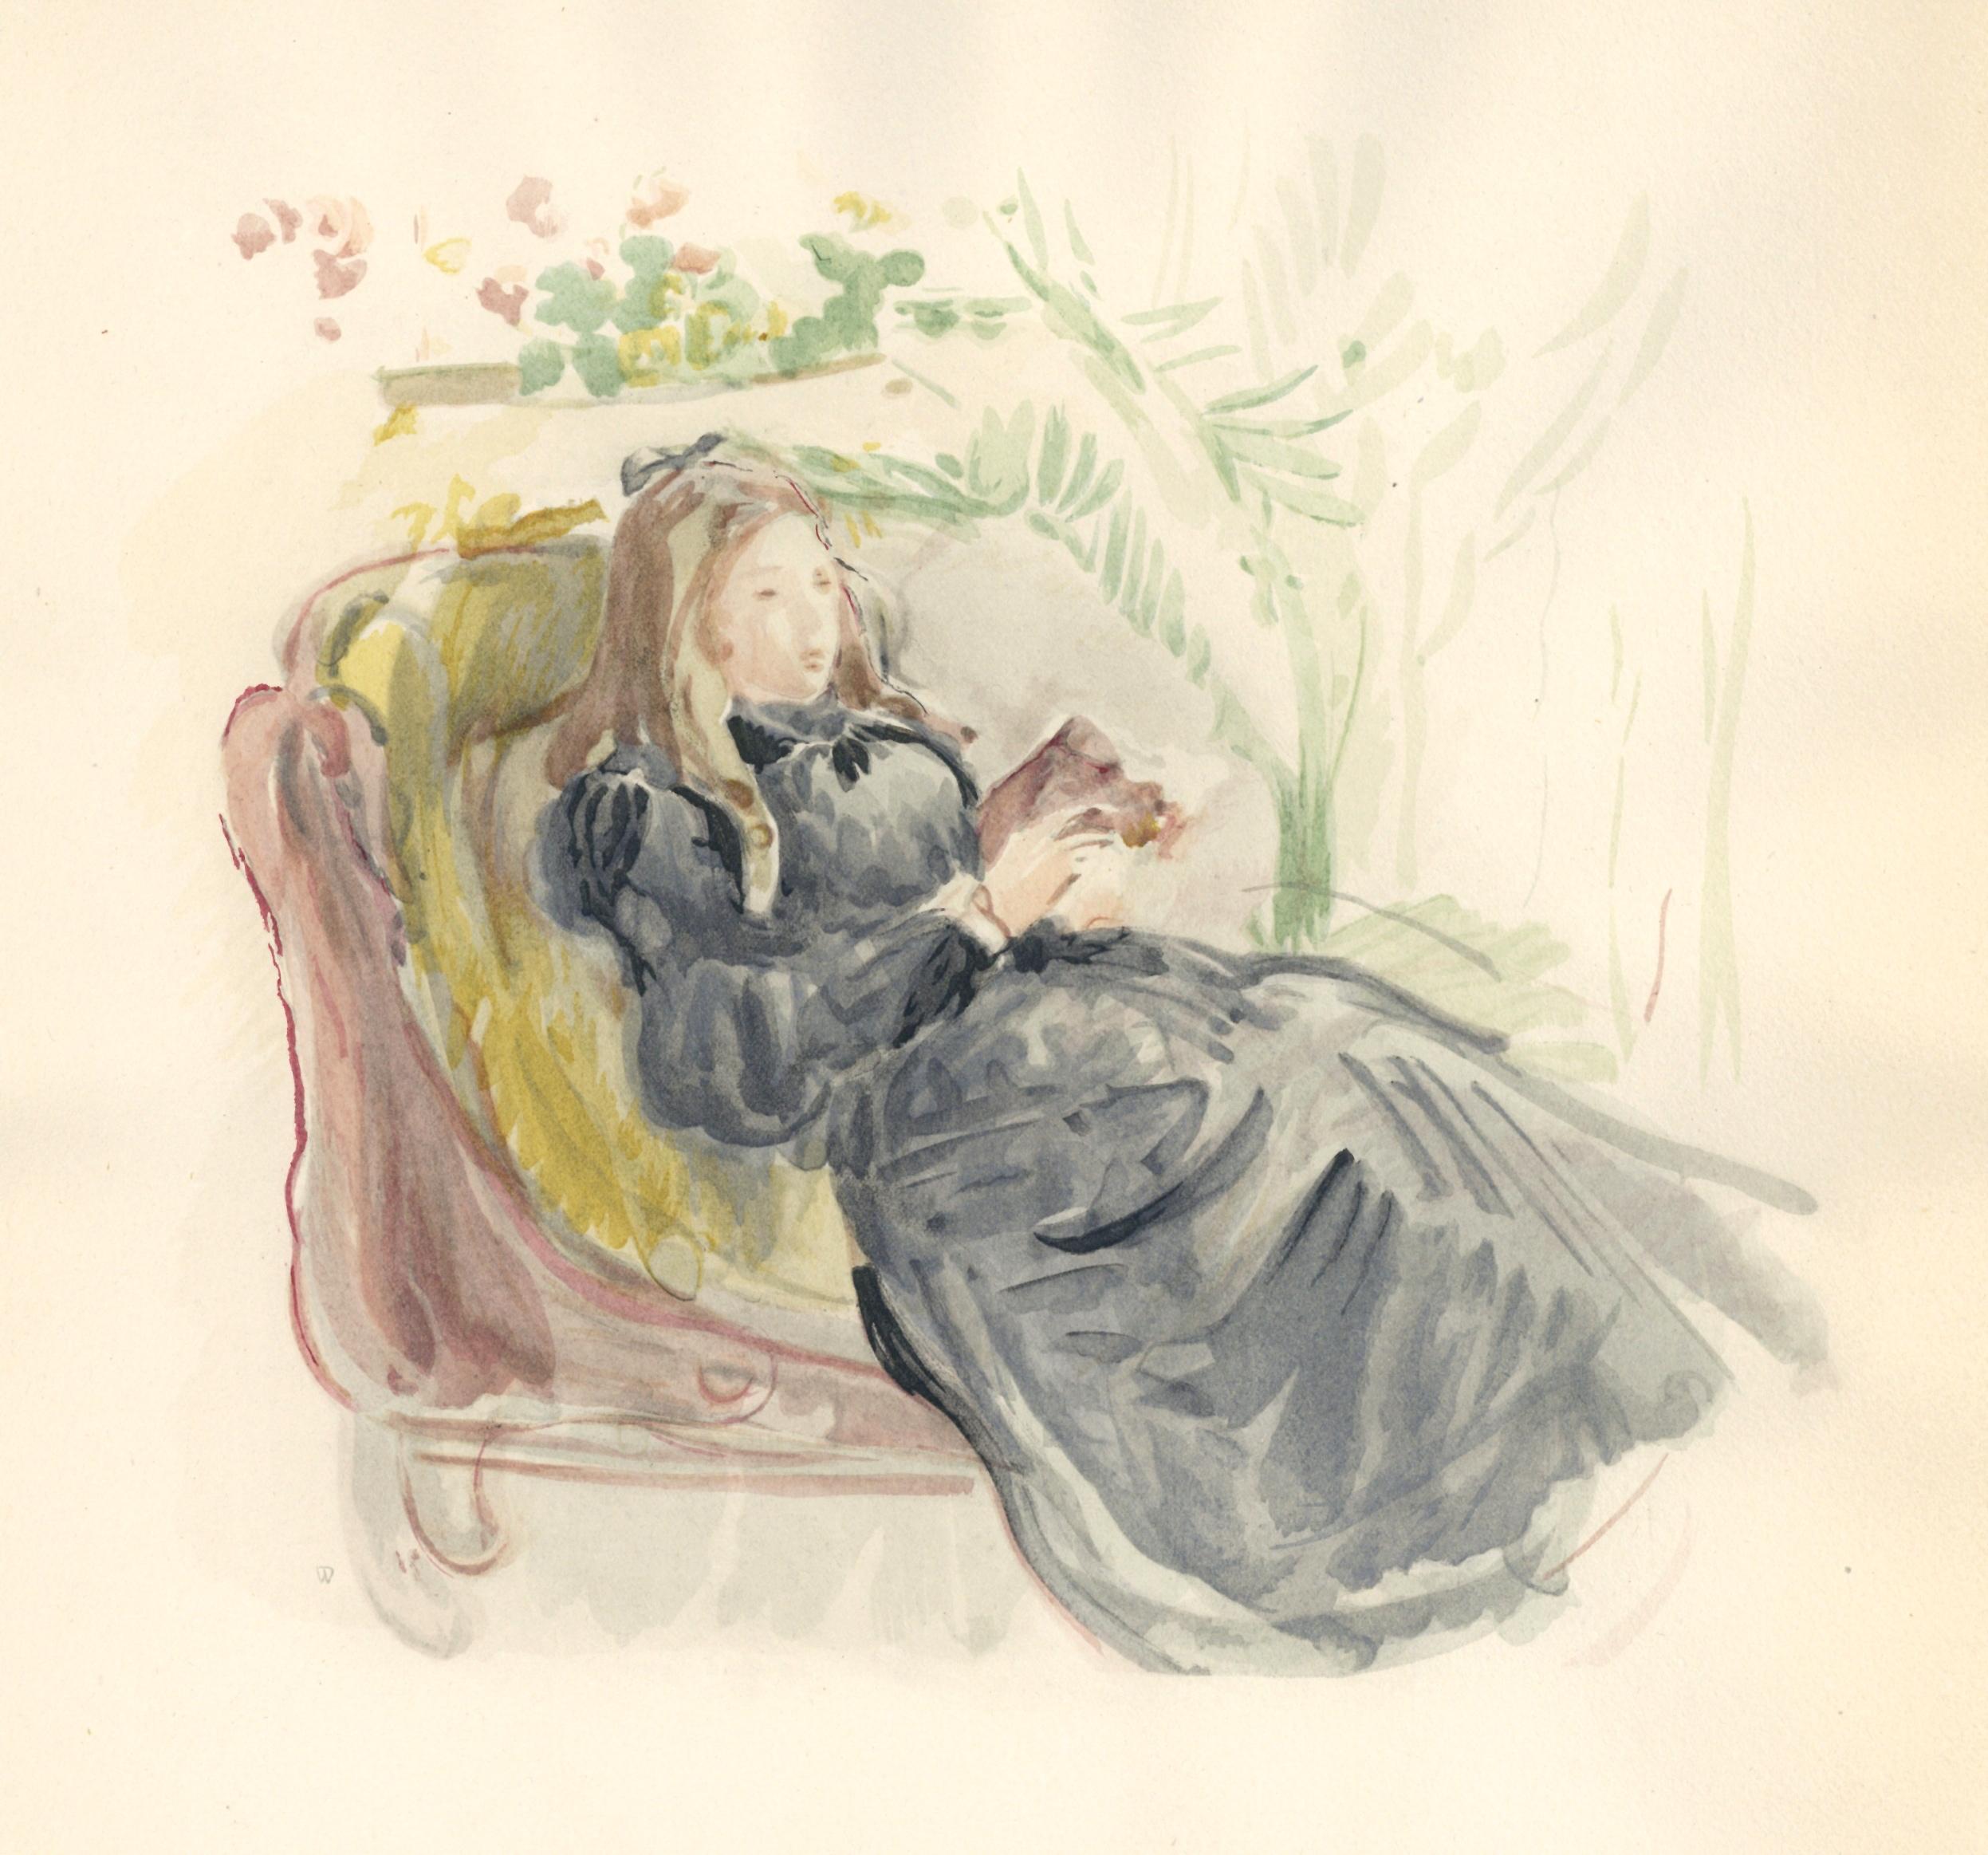 Medium: pochoir (after the 1871 watercolor). Printed 1946 in a limited edition of 300 for the rare "Berthe Morisot Seize Aquarelles" portfolio, published in Paris by Quatre Chemins. The image measures 8 1/4 x 8 1/2 inches (210 x 220 mm). The total